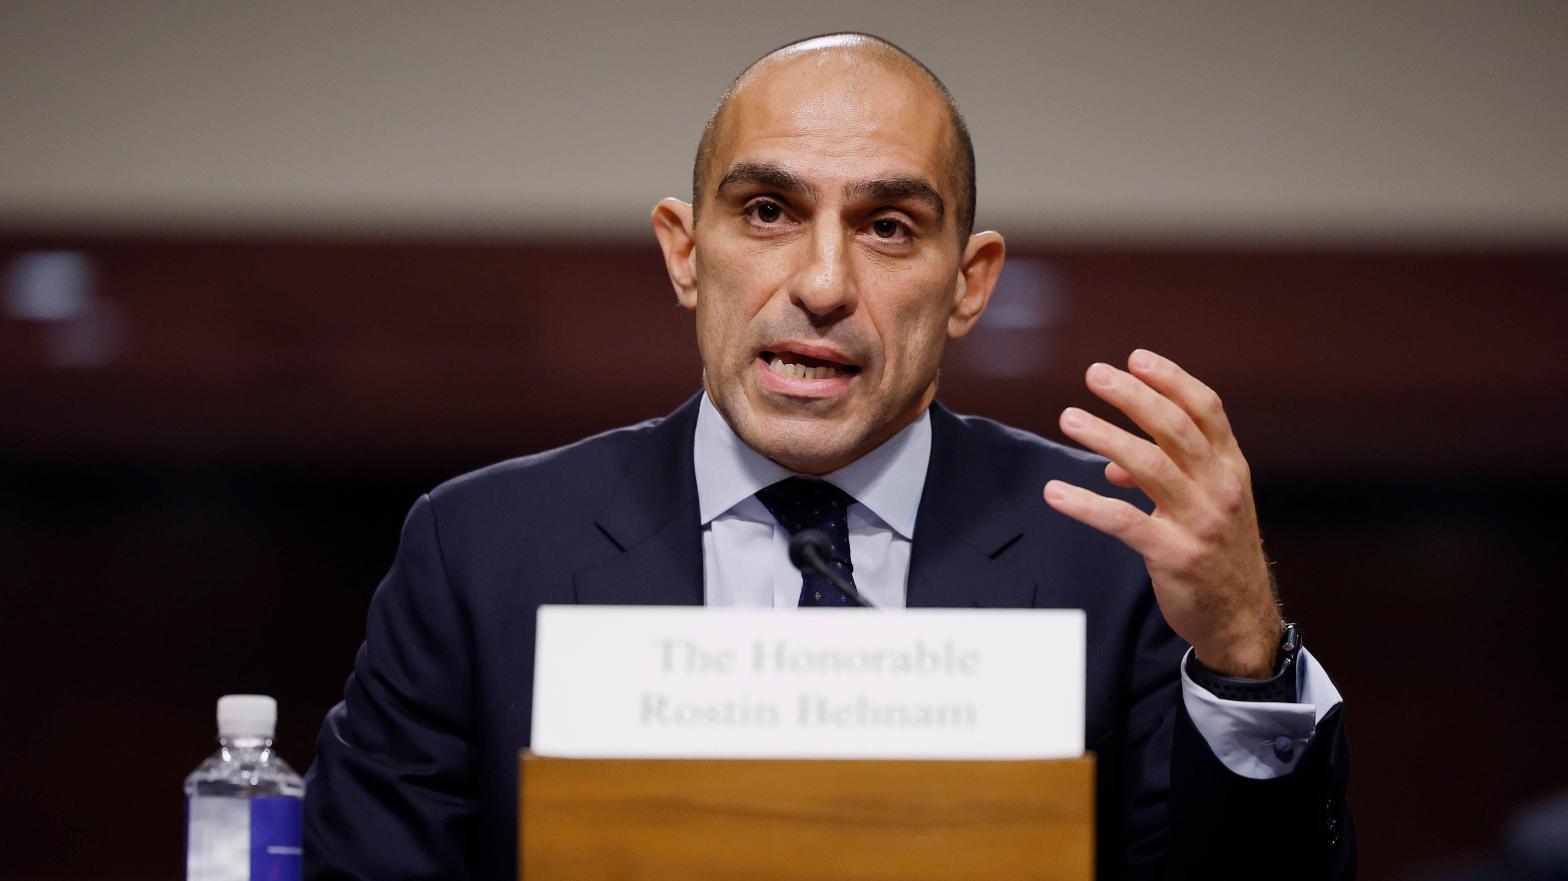 CFTC chairman Rostin Behnam said they have performed 60 enforcement actions on crypto exchanges since 2015. The SEC has done more than 80 since 2017.  (Photo: Chip Somodevilla, Getty Images)